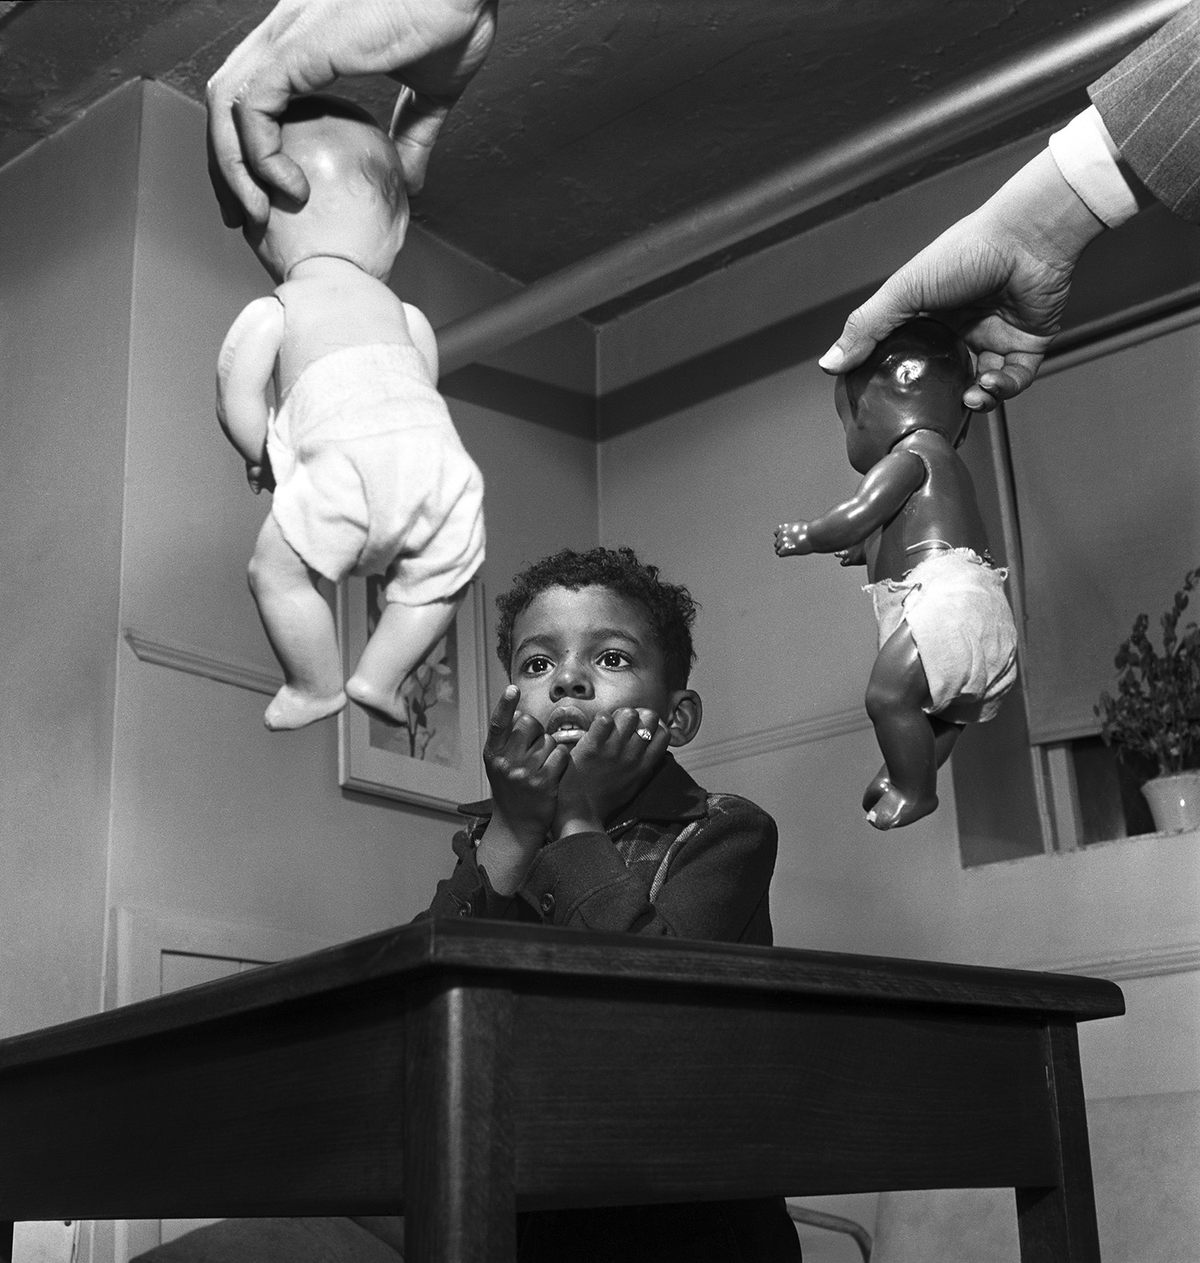 This photograph, taken by Parks in Harlem in 1947 for <em>Ebony</em>, captures a decisive moment. The unidentified boy was asked to choose one of the two dolls to play with; he chose the white one. This “doll test,” designed by psychologists Kenneth and Mamie Clark, ultimately found that prejudice and segregation created feelings of inferiority among Black children. 